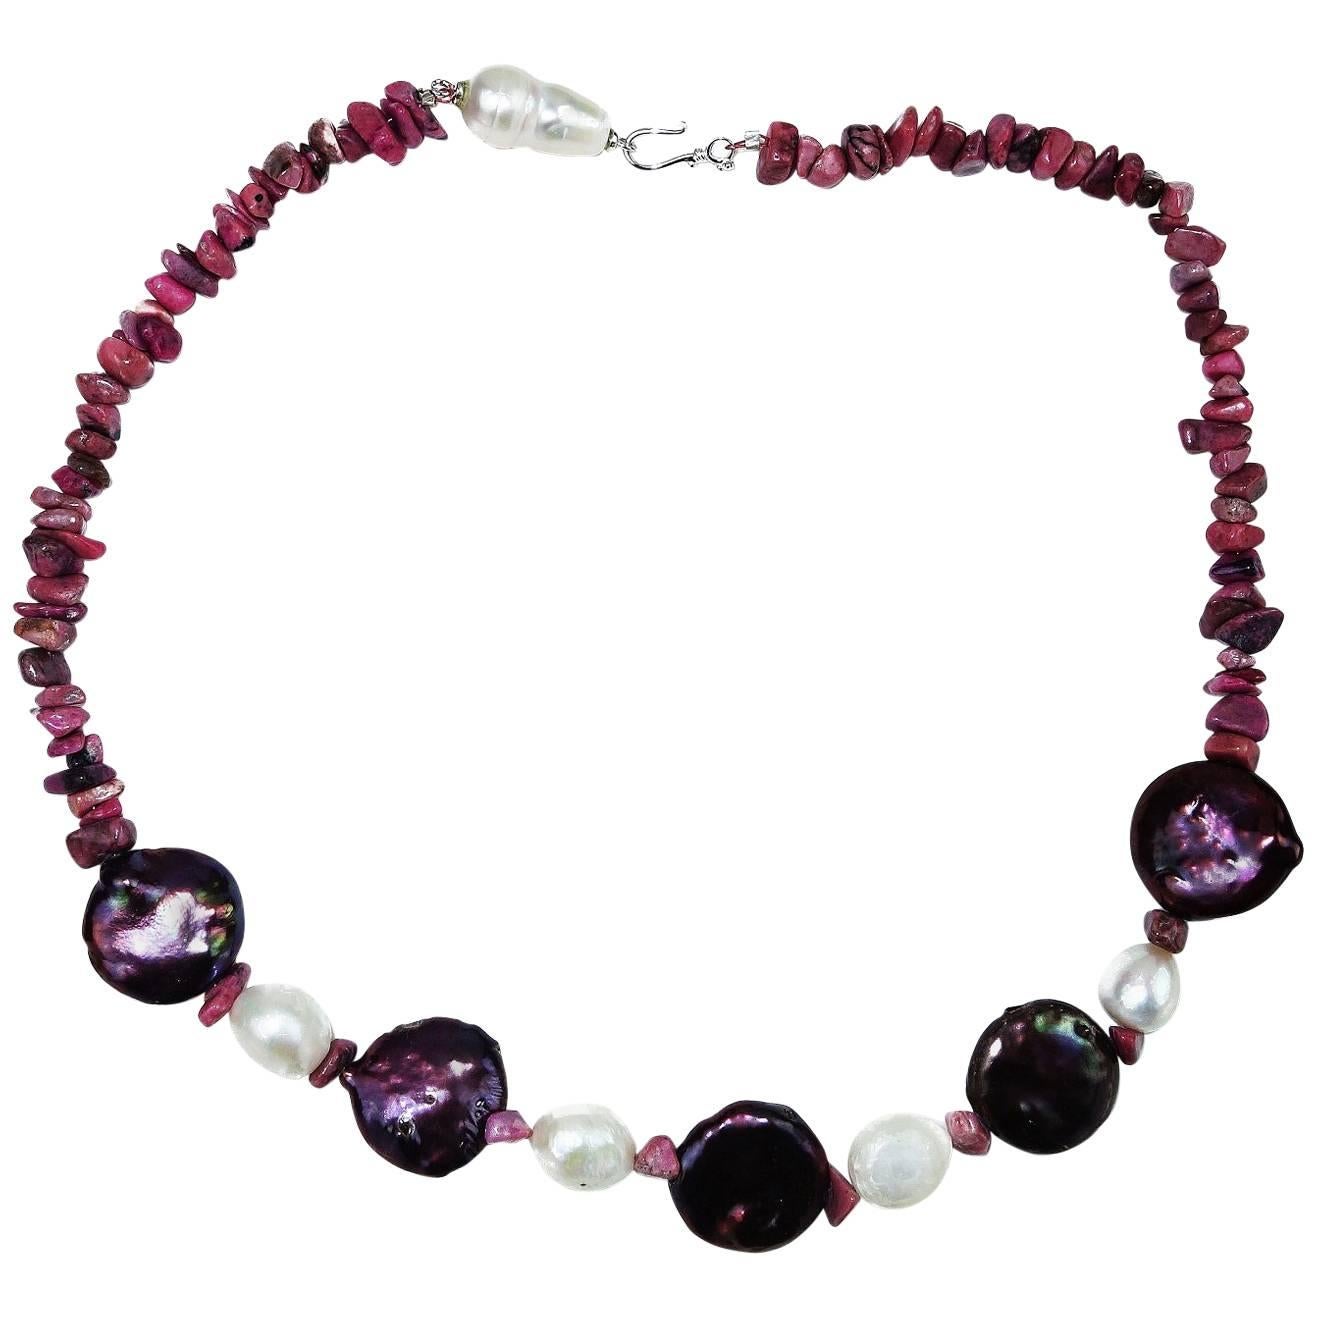 AJD 20 Inch Necklace of Mauve Coin Pearl, Pearl, & Rhodonite Chips  Great Gift!!